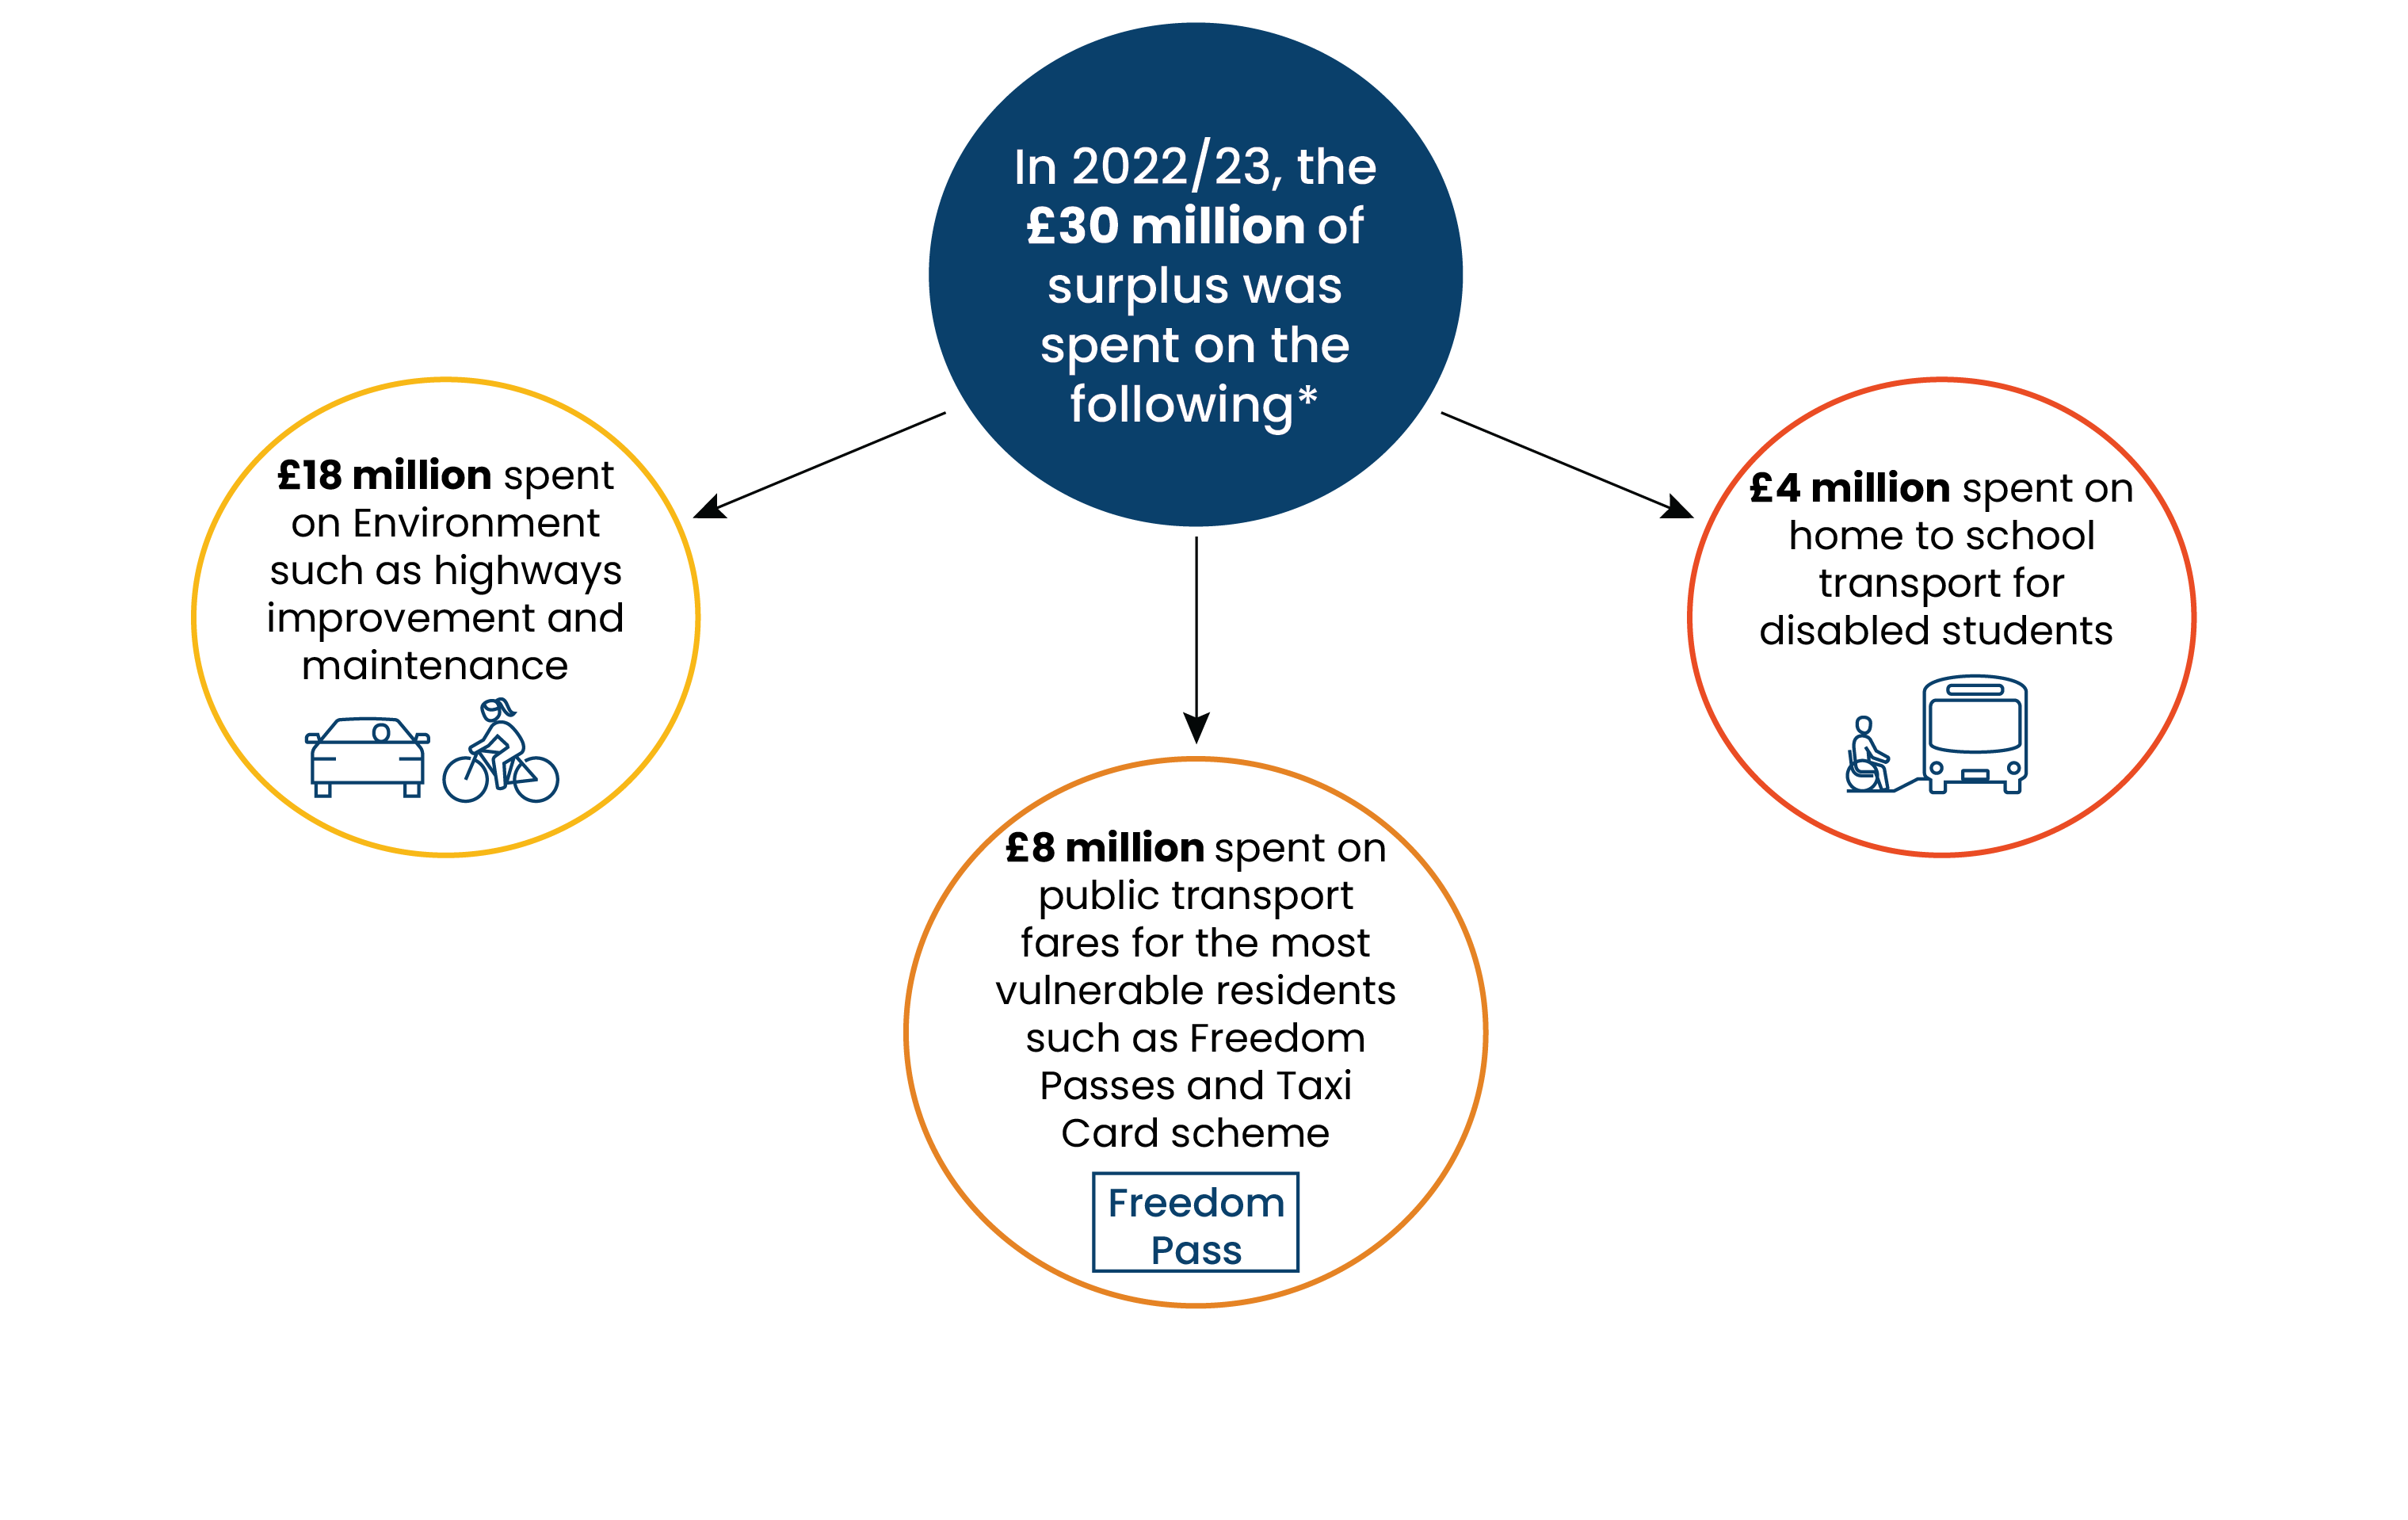 Graphic presenting what parking fees and charges are spent on. In 2022/23, the £30 million of surplus was spent on the following*: £18 million spent on Environment such as highways improvements and maintenance, £8 million spent on public transport fares for the most vulnerable residents such as Freedom Passes and Taxi Card scheme, £4 million spent on home to school transport for disabled students. 